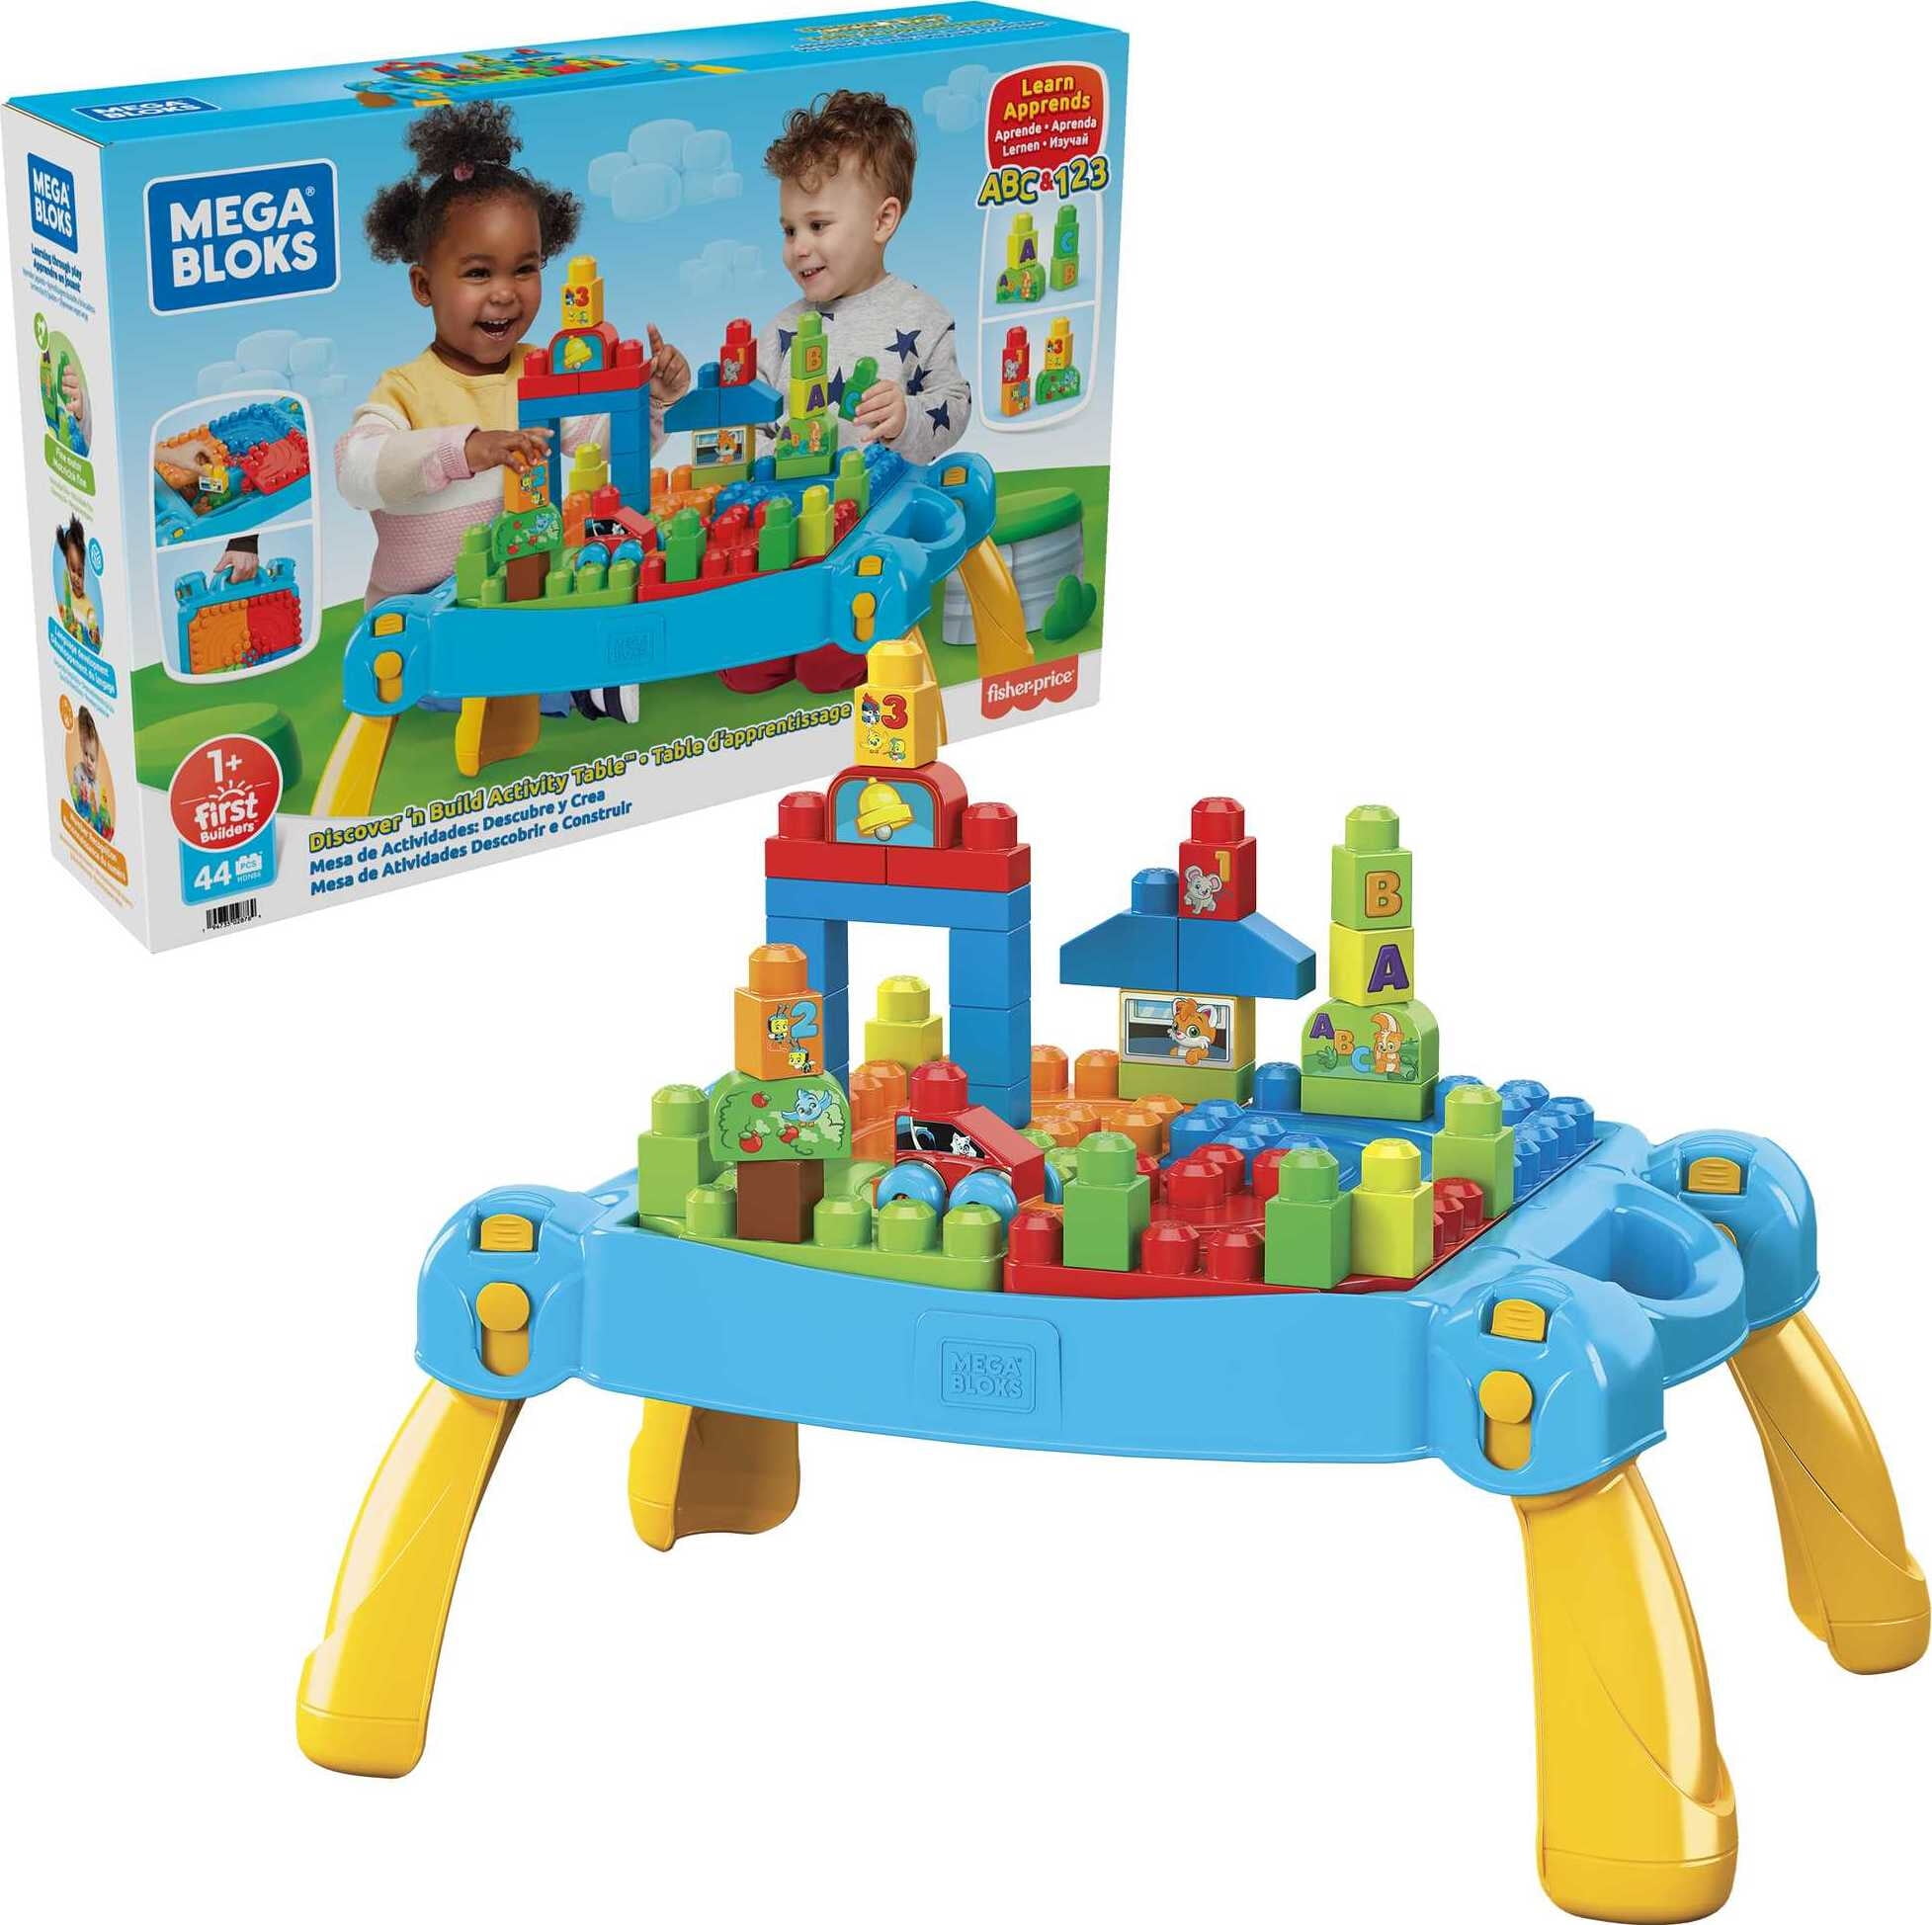 MEGA BLOKS Building Toy Blocks Discover n Build Activity Table (44 Pieces) For Toddler